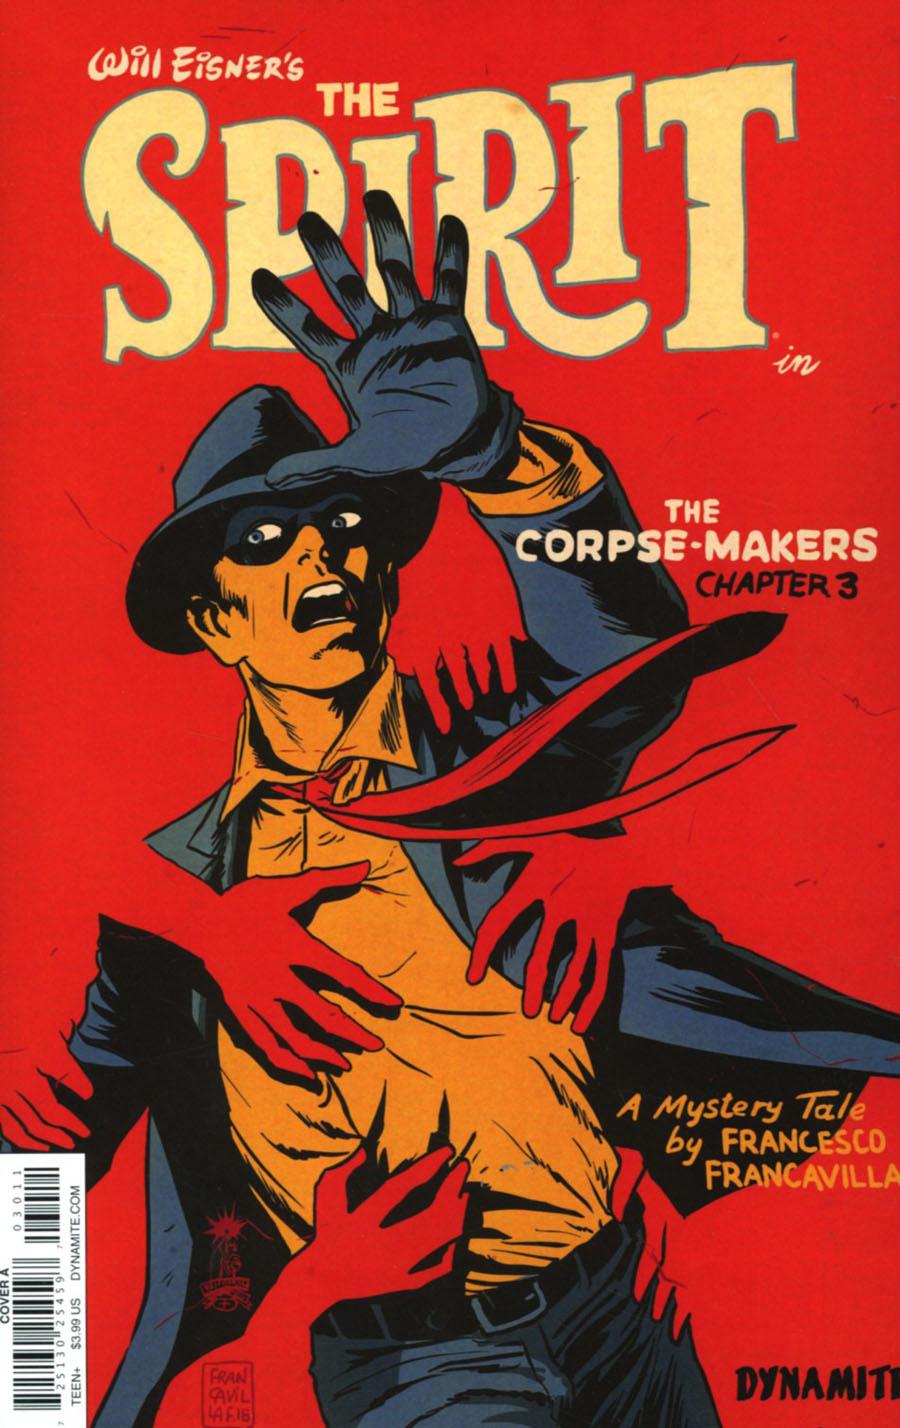 Will Eisners Spirit Corpse-Makers Vol. 1 #3